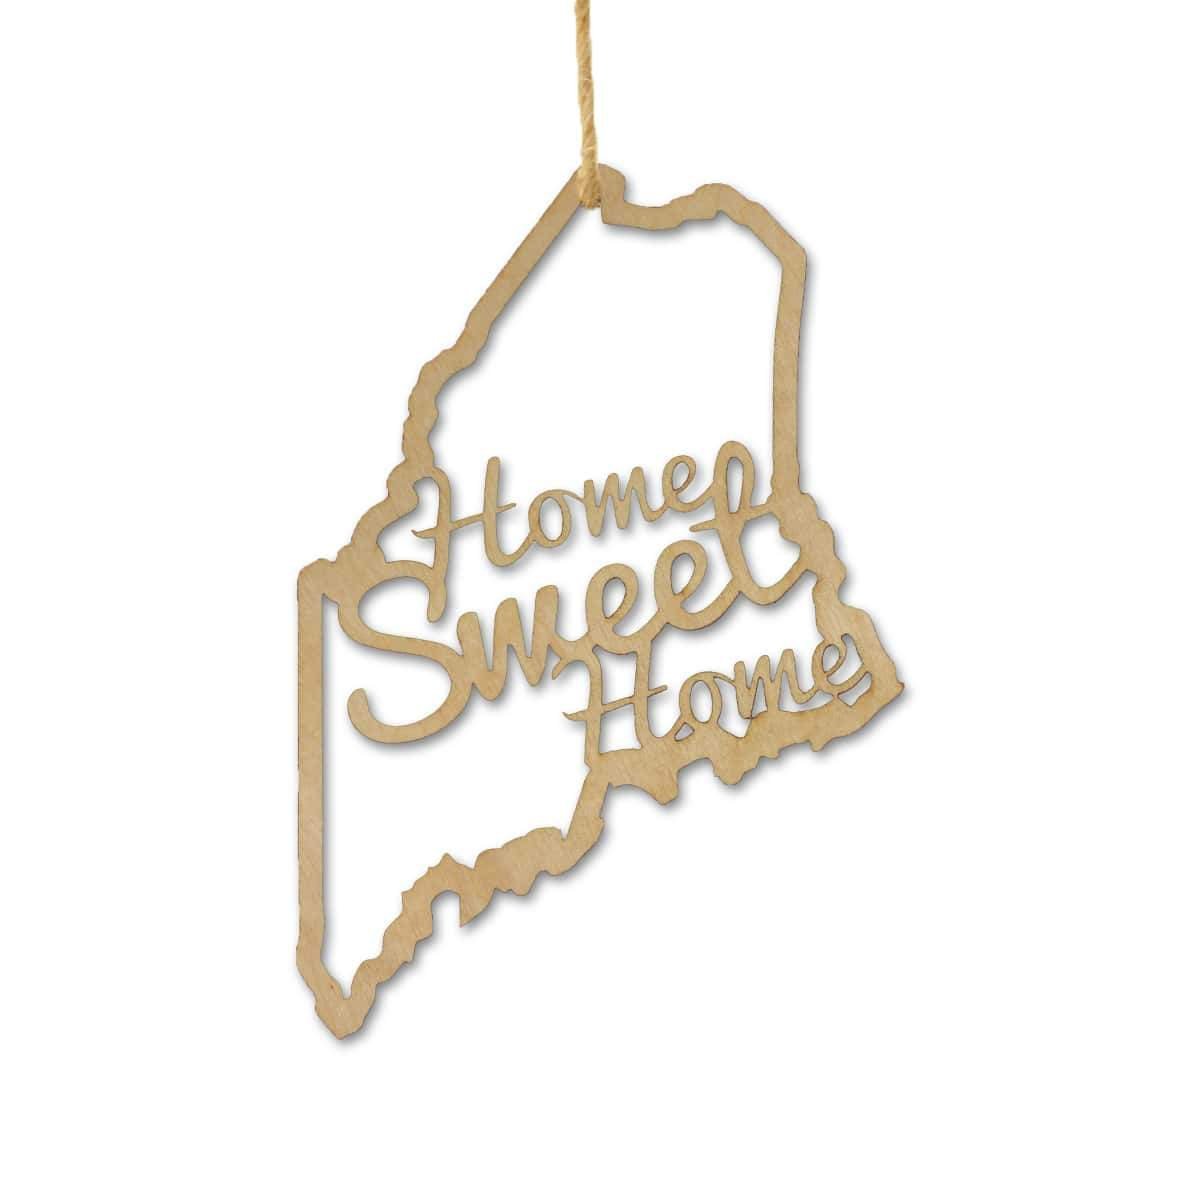 Torched Products Ornaments Maine Home Sweet Home Ornaments (781216186485)